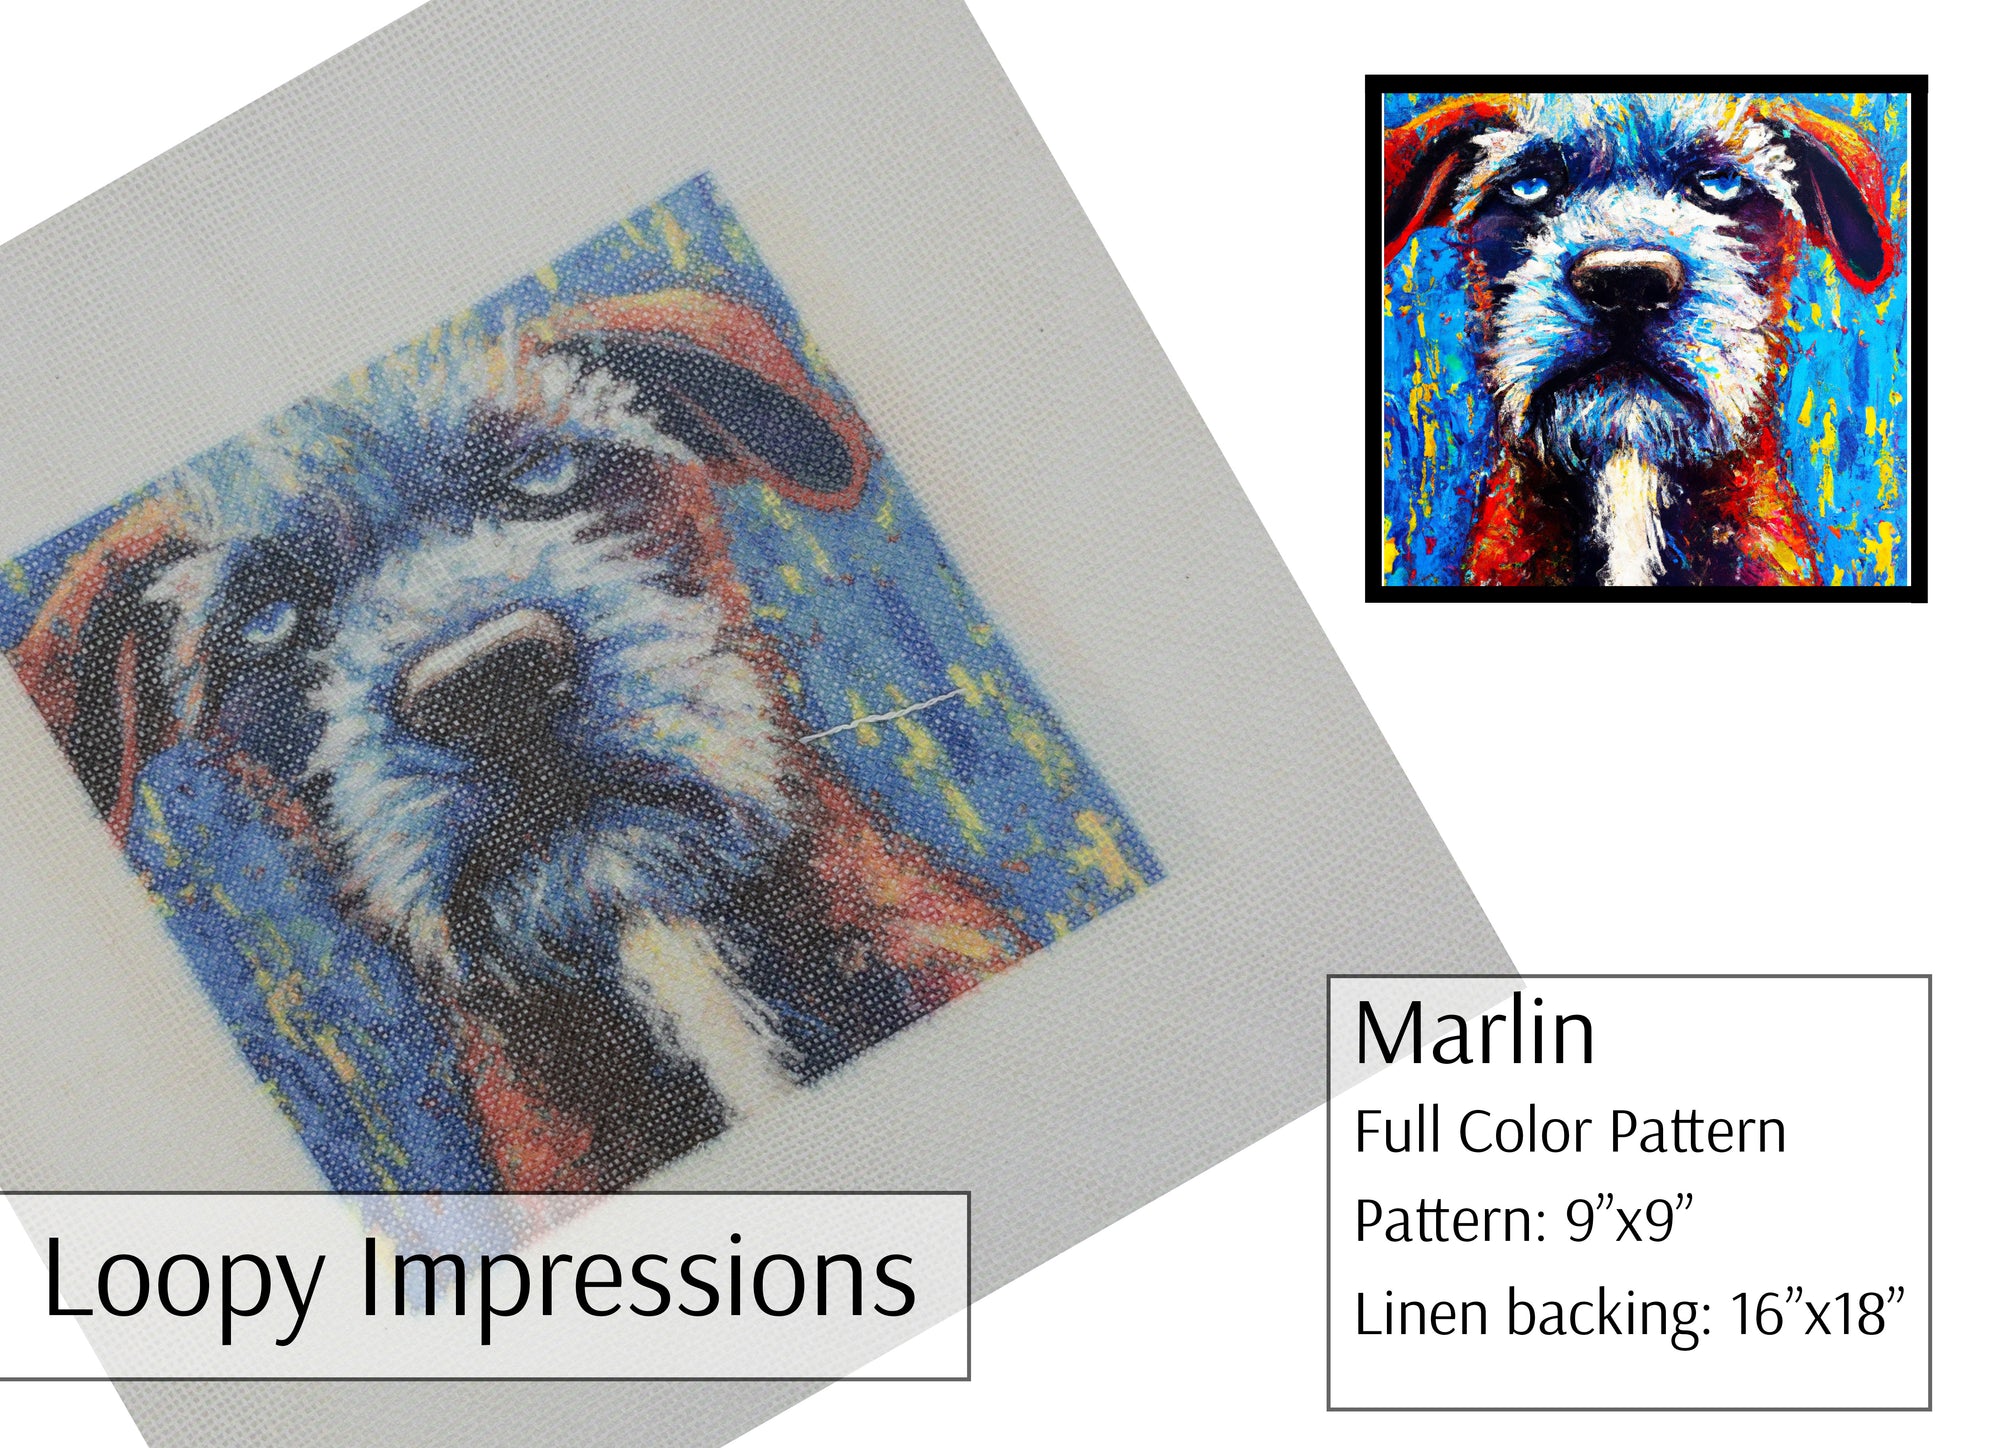 Loopy Impressions Full Color Pattern - Marlin